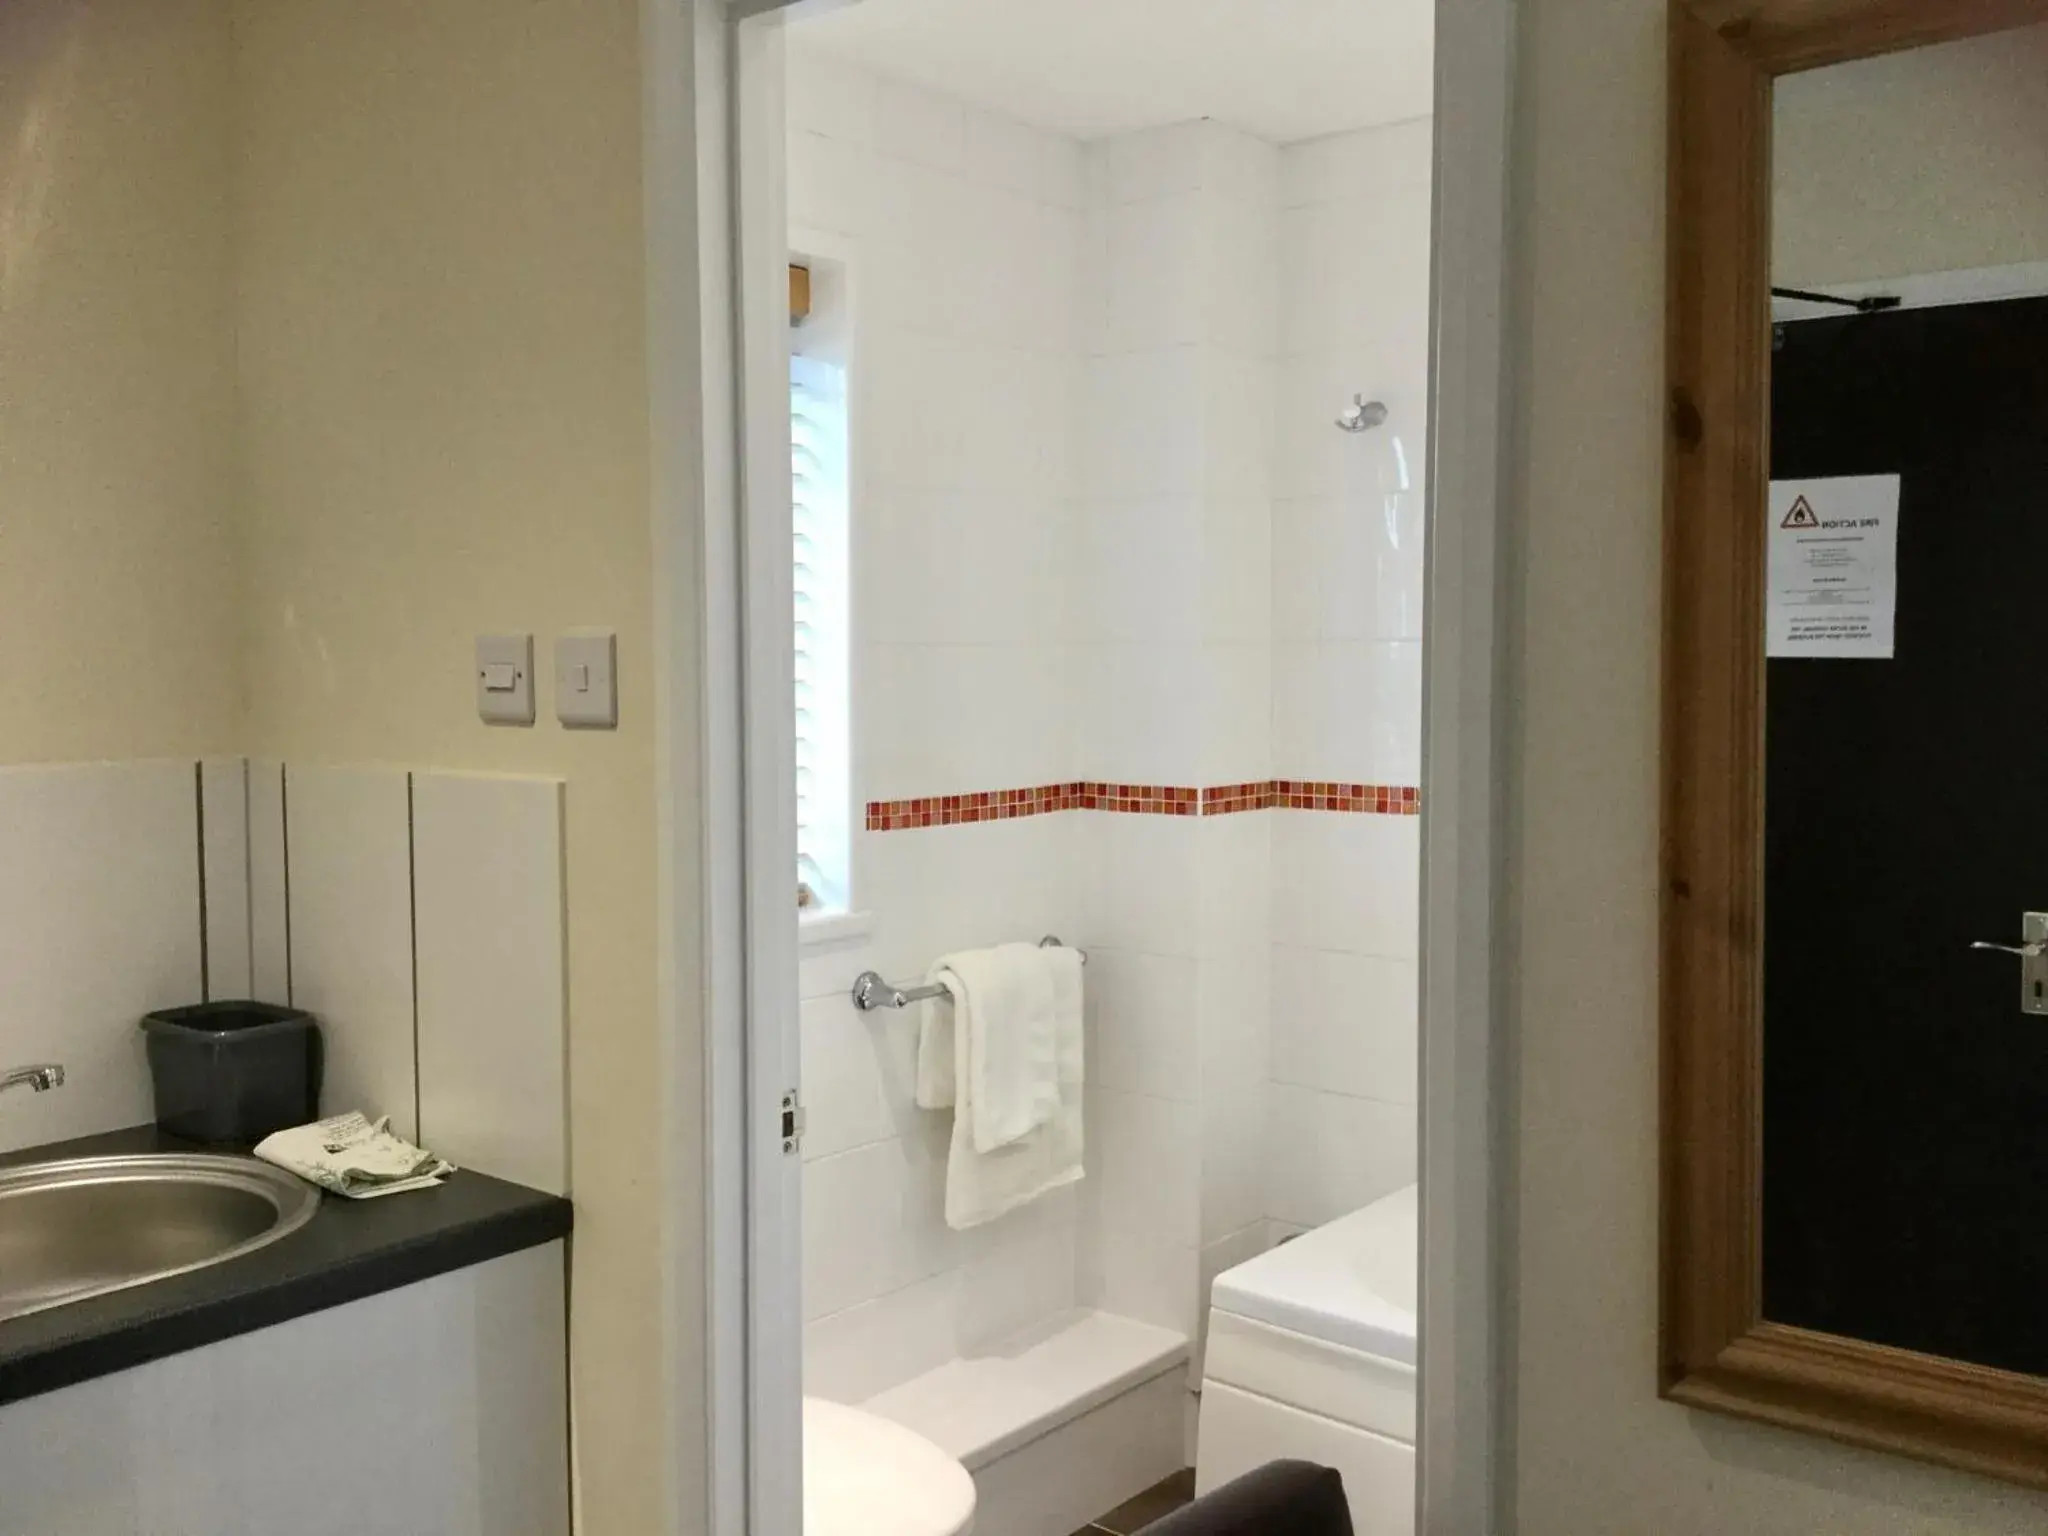 Bathroom in Smithaleigh Farm Rooms and Apartments